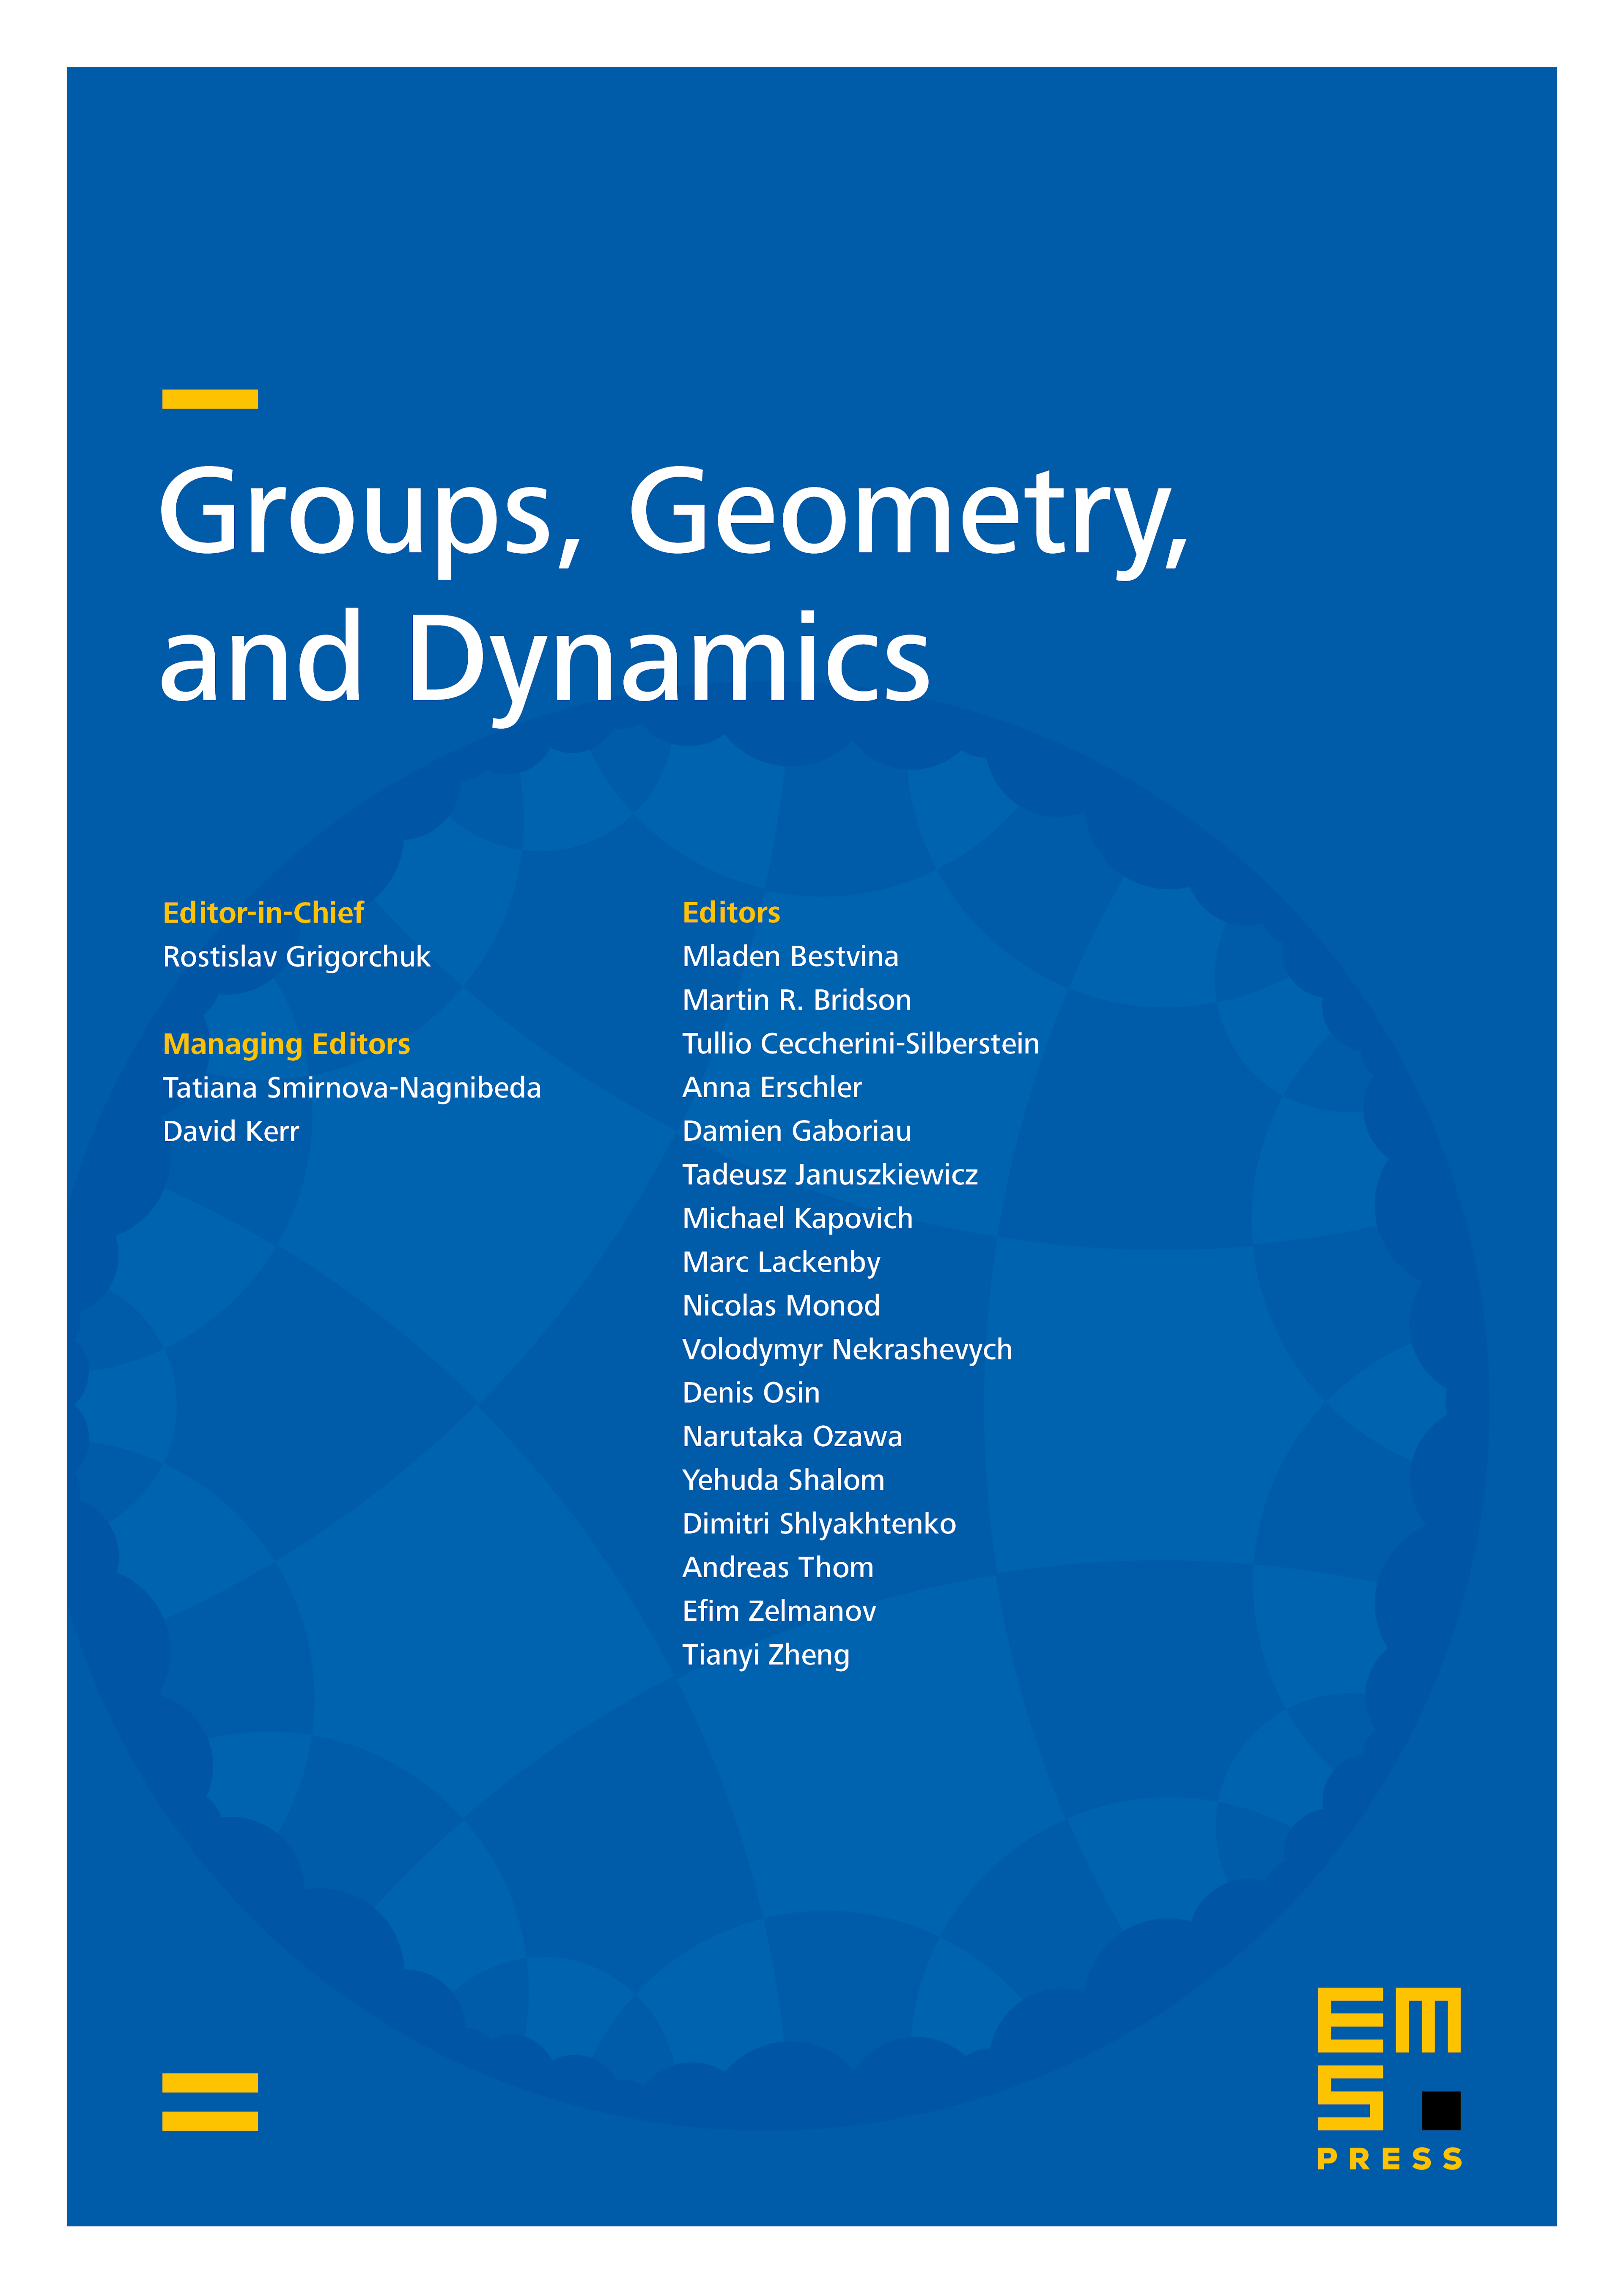 Self-similar products of groups cover